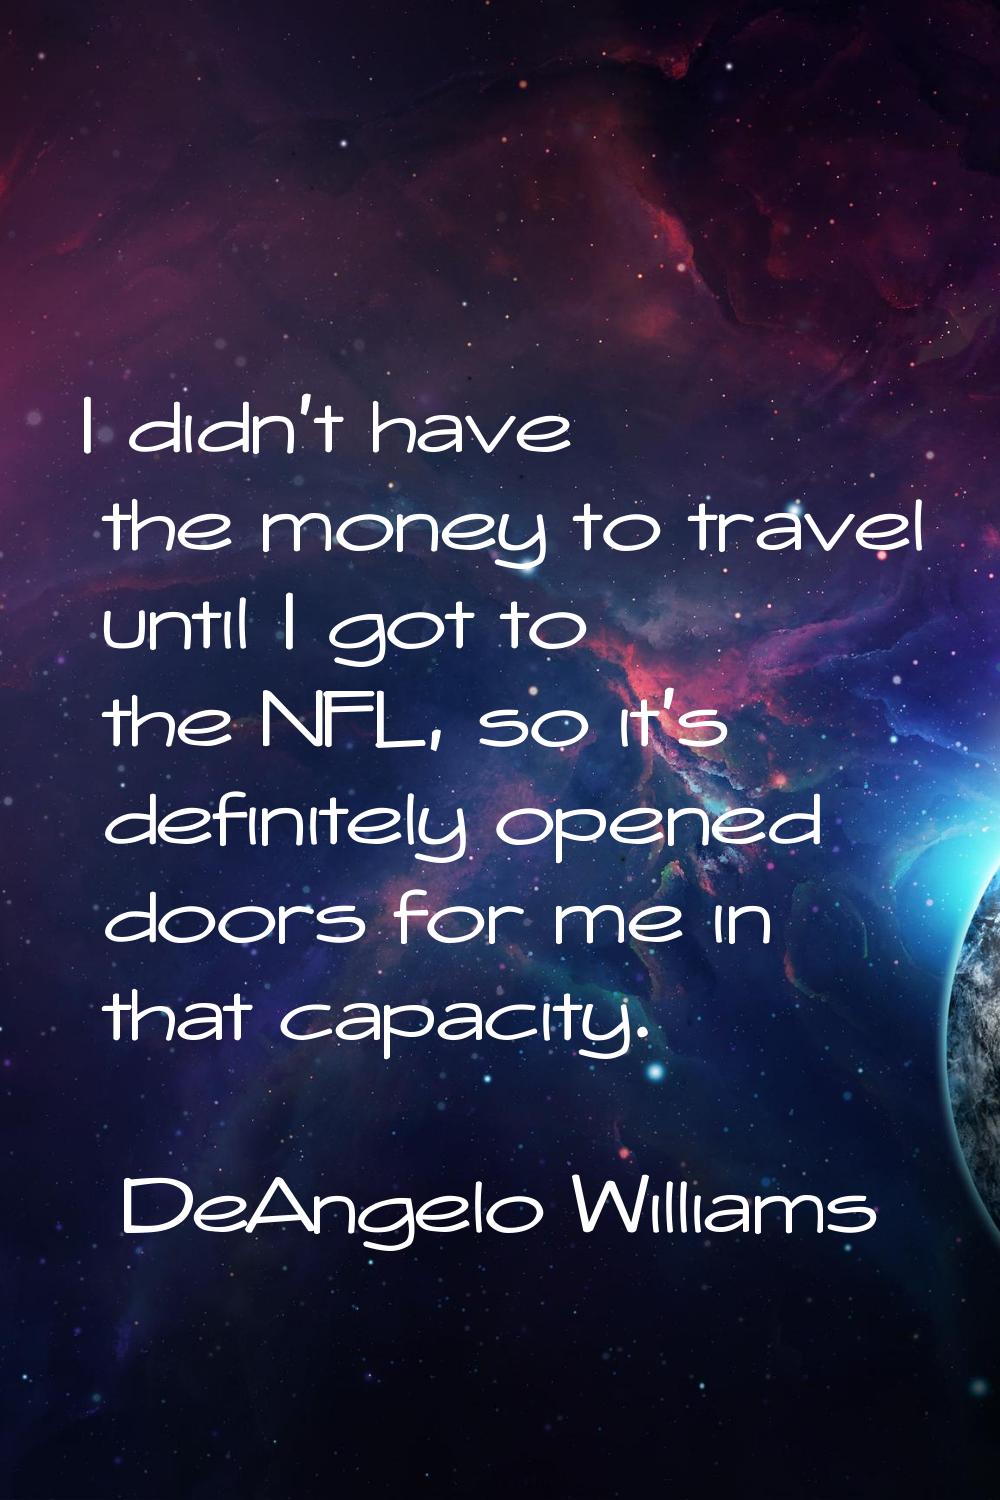 I didn't have the money to travel until I got to the NFL, so it's definitely opened doors for me in